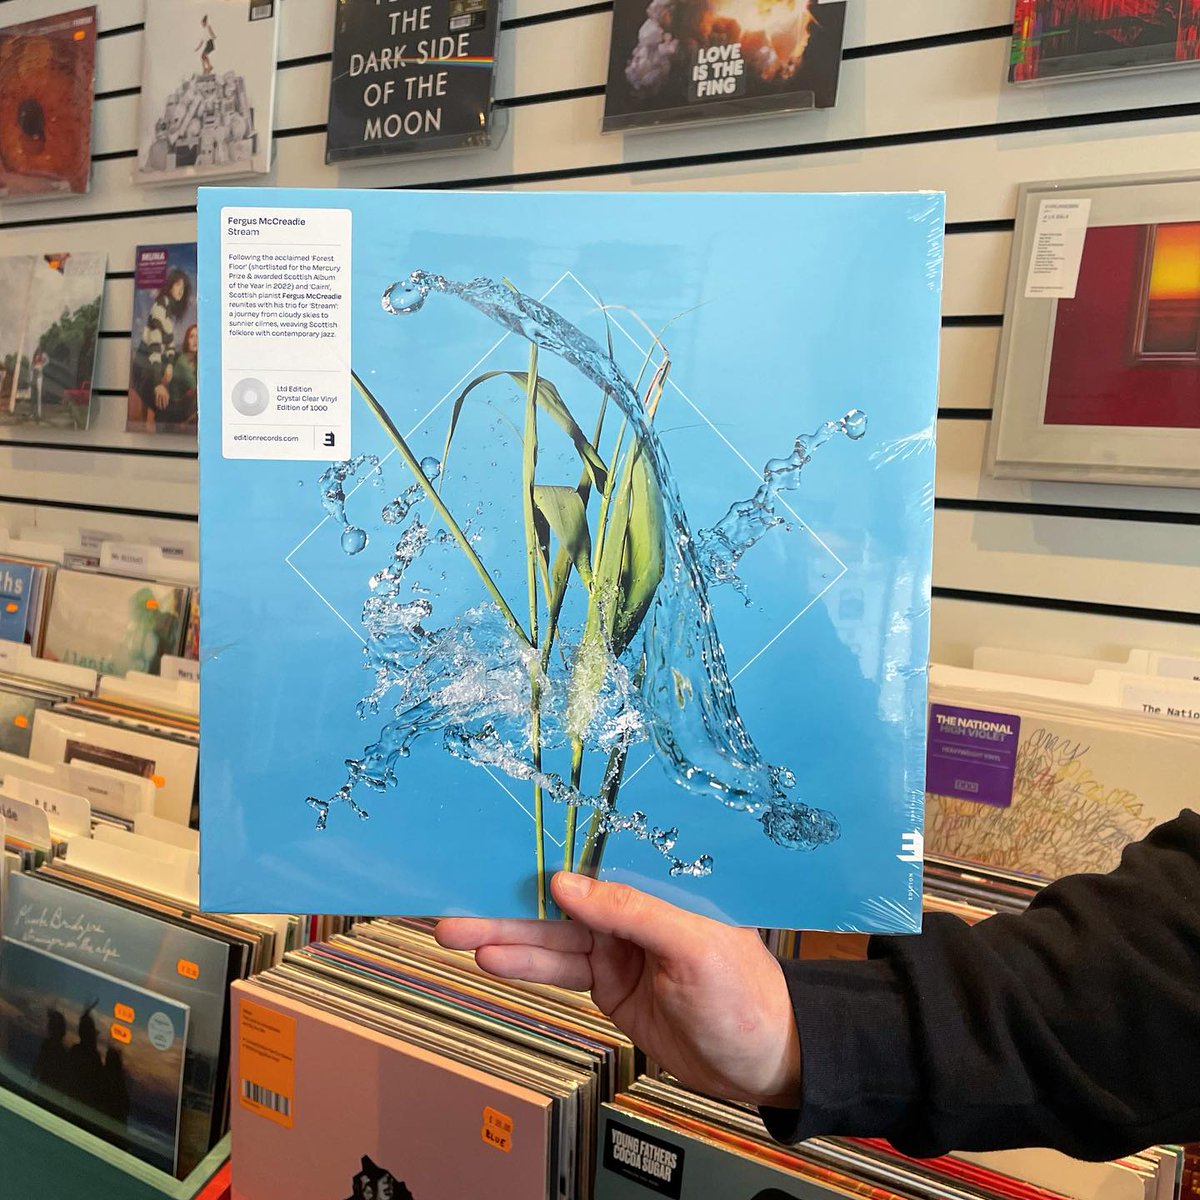 We got the brand new Fergus McCreadie - Stream on repeat today! So good it got a twin spin. A journey from cloudy skies to sunnier climes, weaving Scottish folklore with contemporary jazz. Available in store & online on crystal clear vinyl. Find it at mixeduprecords.com/products/fergu…